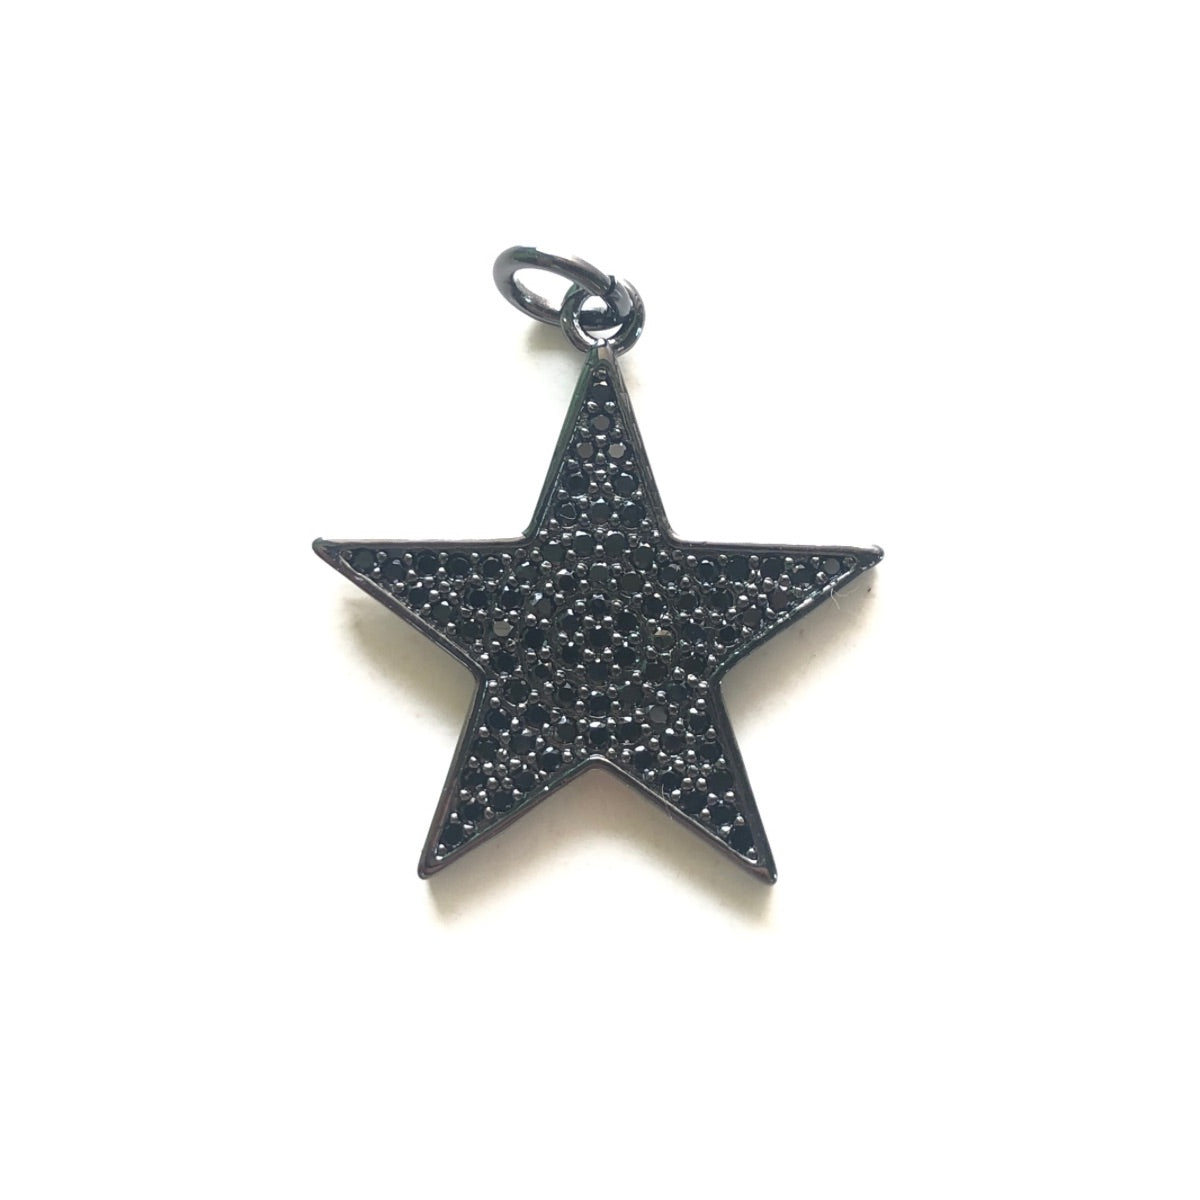 10pcs/lot 26.5*24.5mm CZ Paved Star Charms Black on Black CZ Paved Charms New Charms Arrivals Sun Moon Stars Charms Beads Beyond